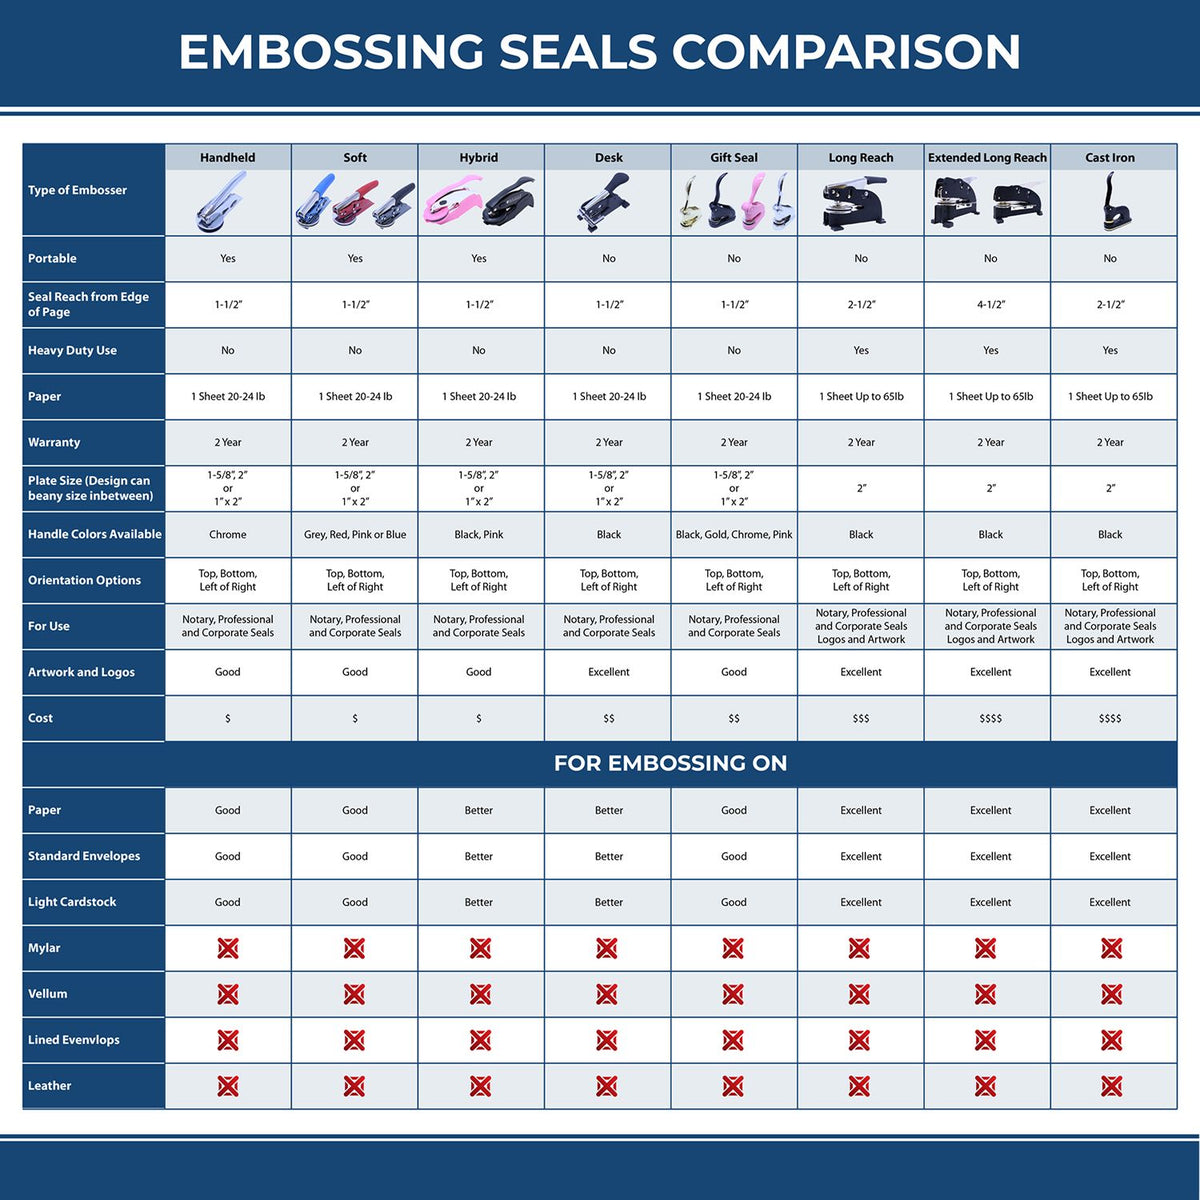 A comparison chart for the different types of mount models available for the Hybrid Pennsylvania Architect Seal